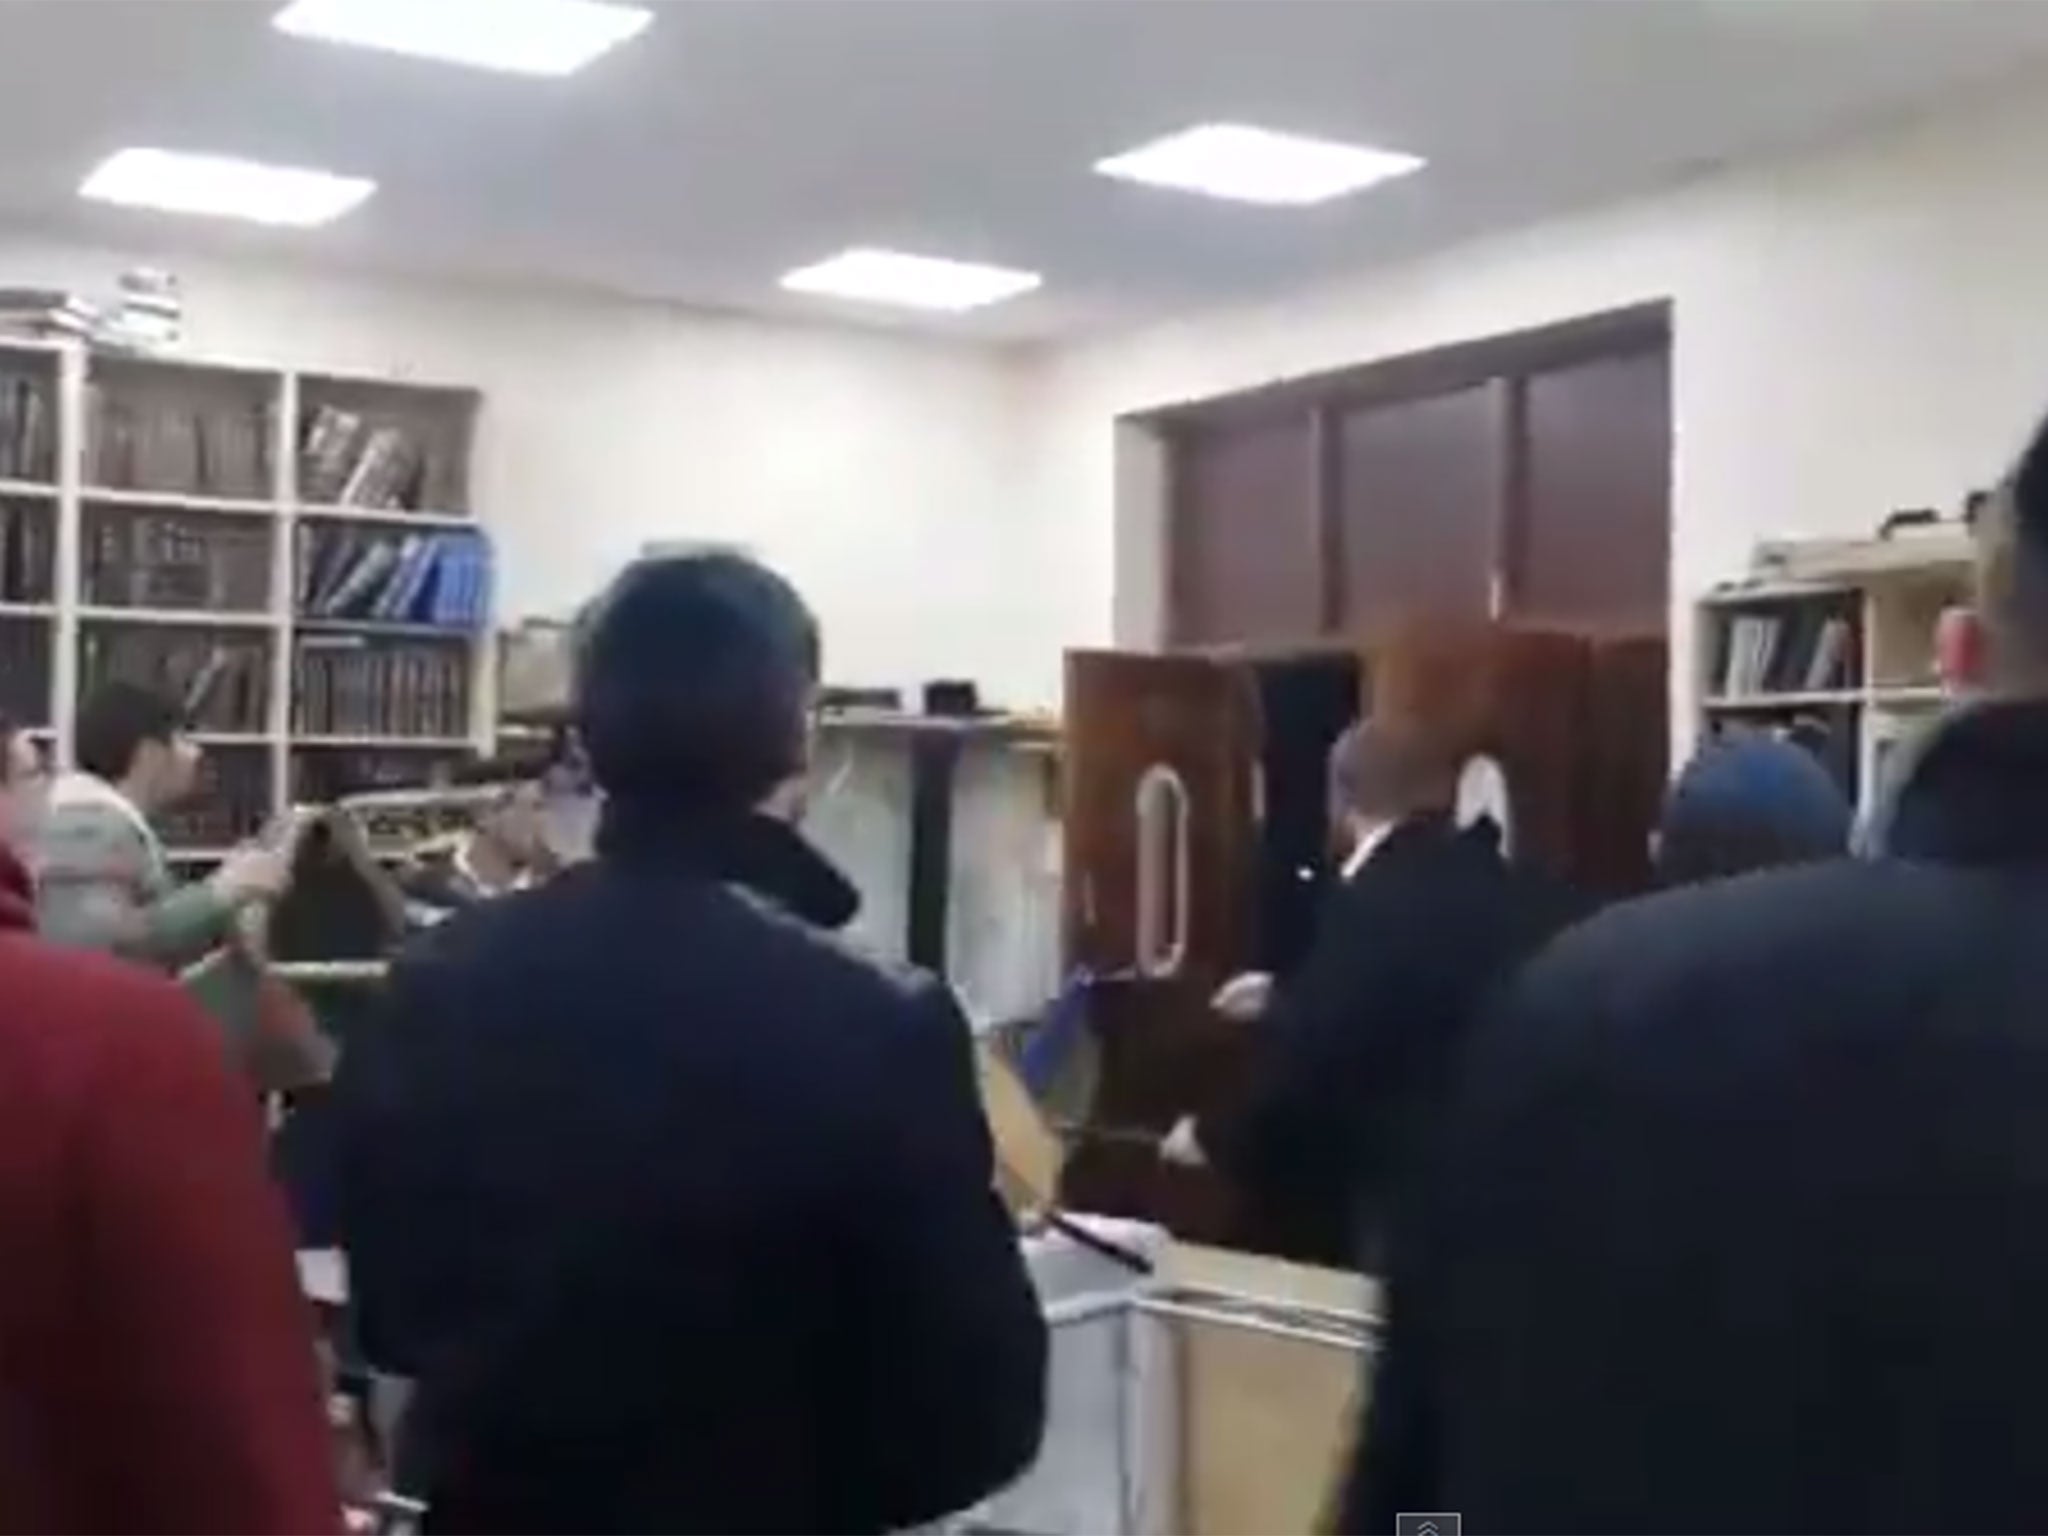 The video, taken from inside the synagogue, appears to show an attack by a gang of drunk men